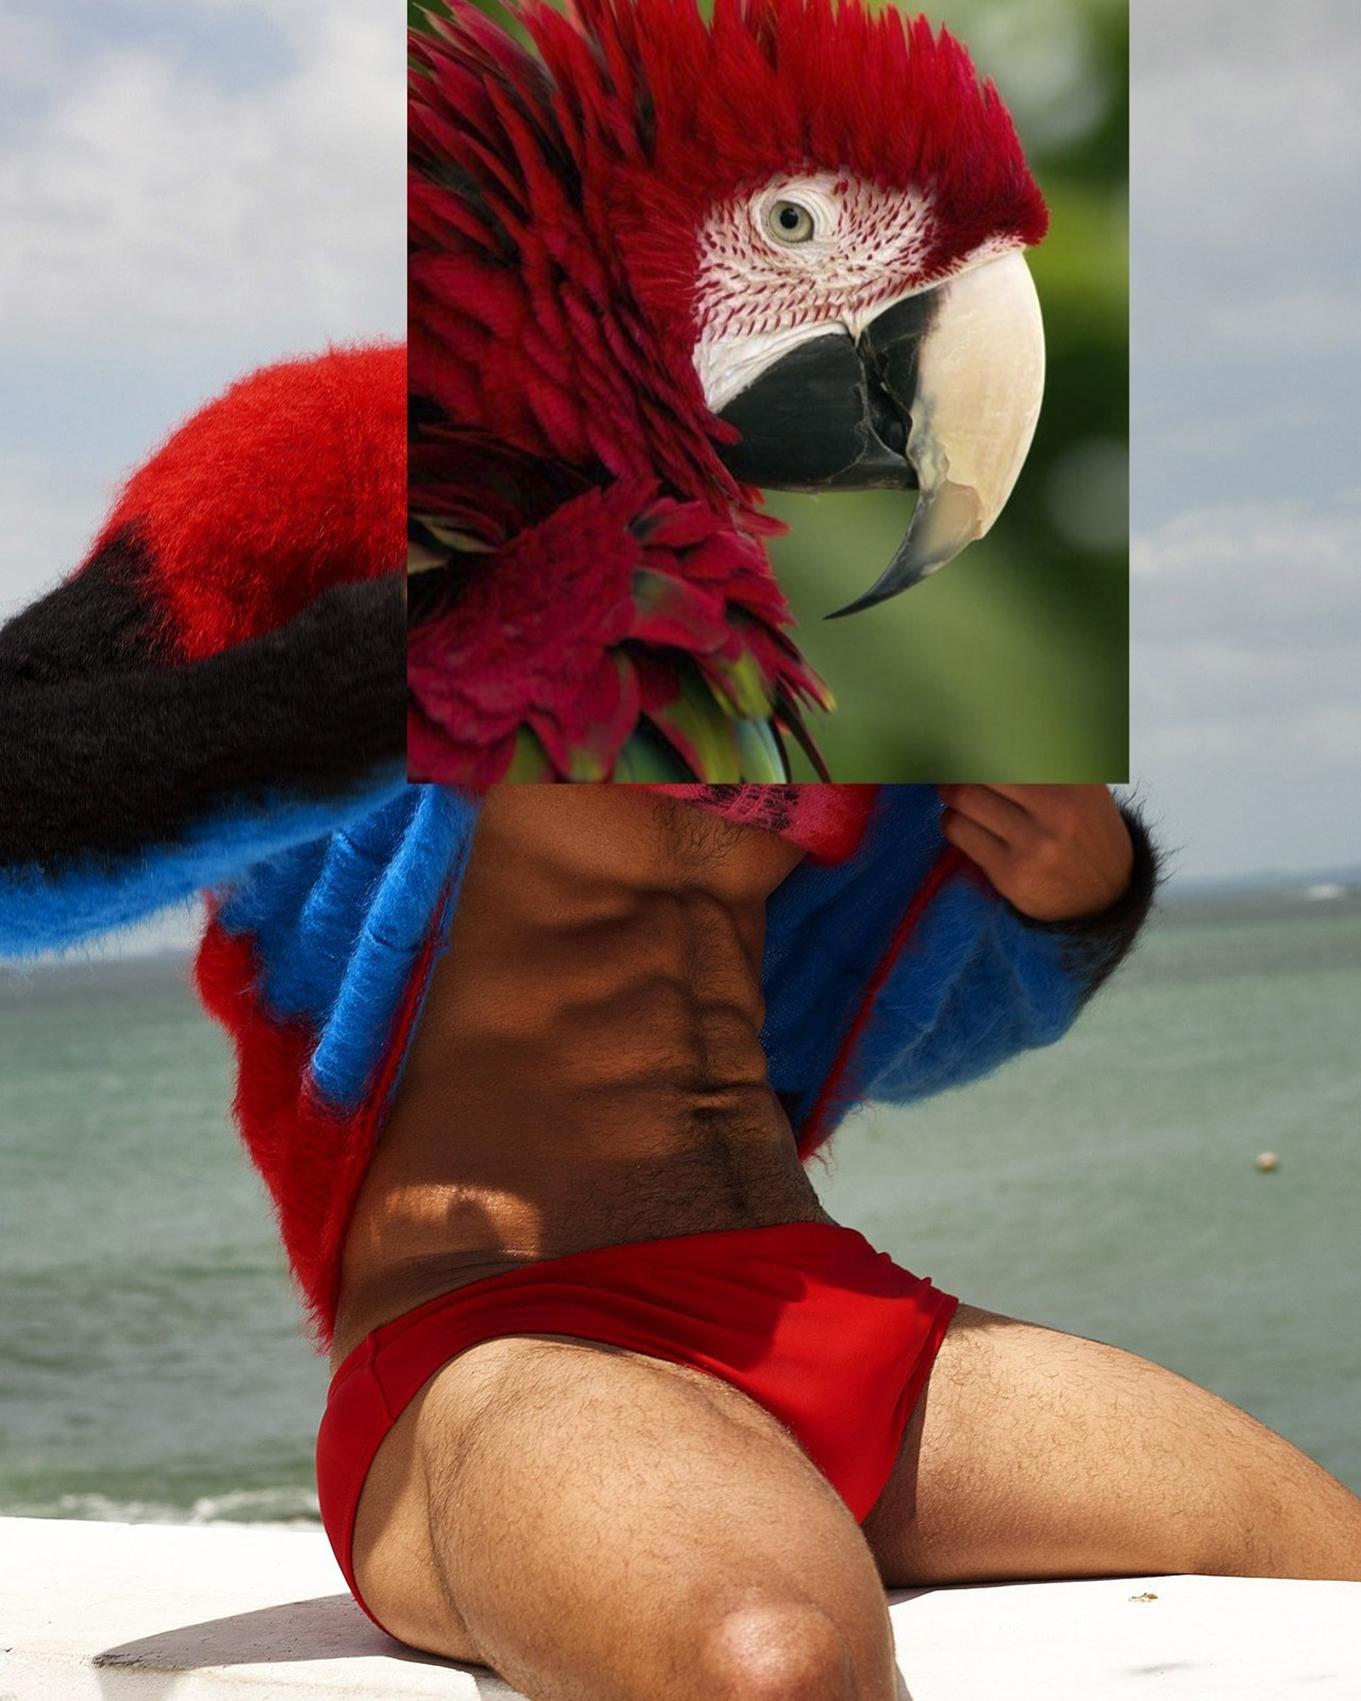 Red parrot + muscular man digital collage print by spanish artist Naro Pinosa, made famous in social media. Unique signed-by-artist piece. Authenticity certificated.
Print on photography papper. Glass and white lacquered wooden frame.